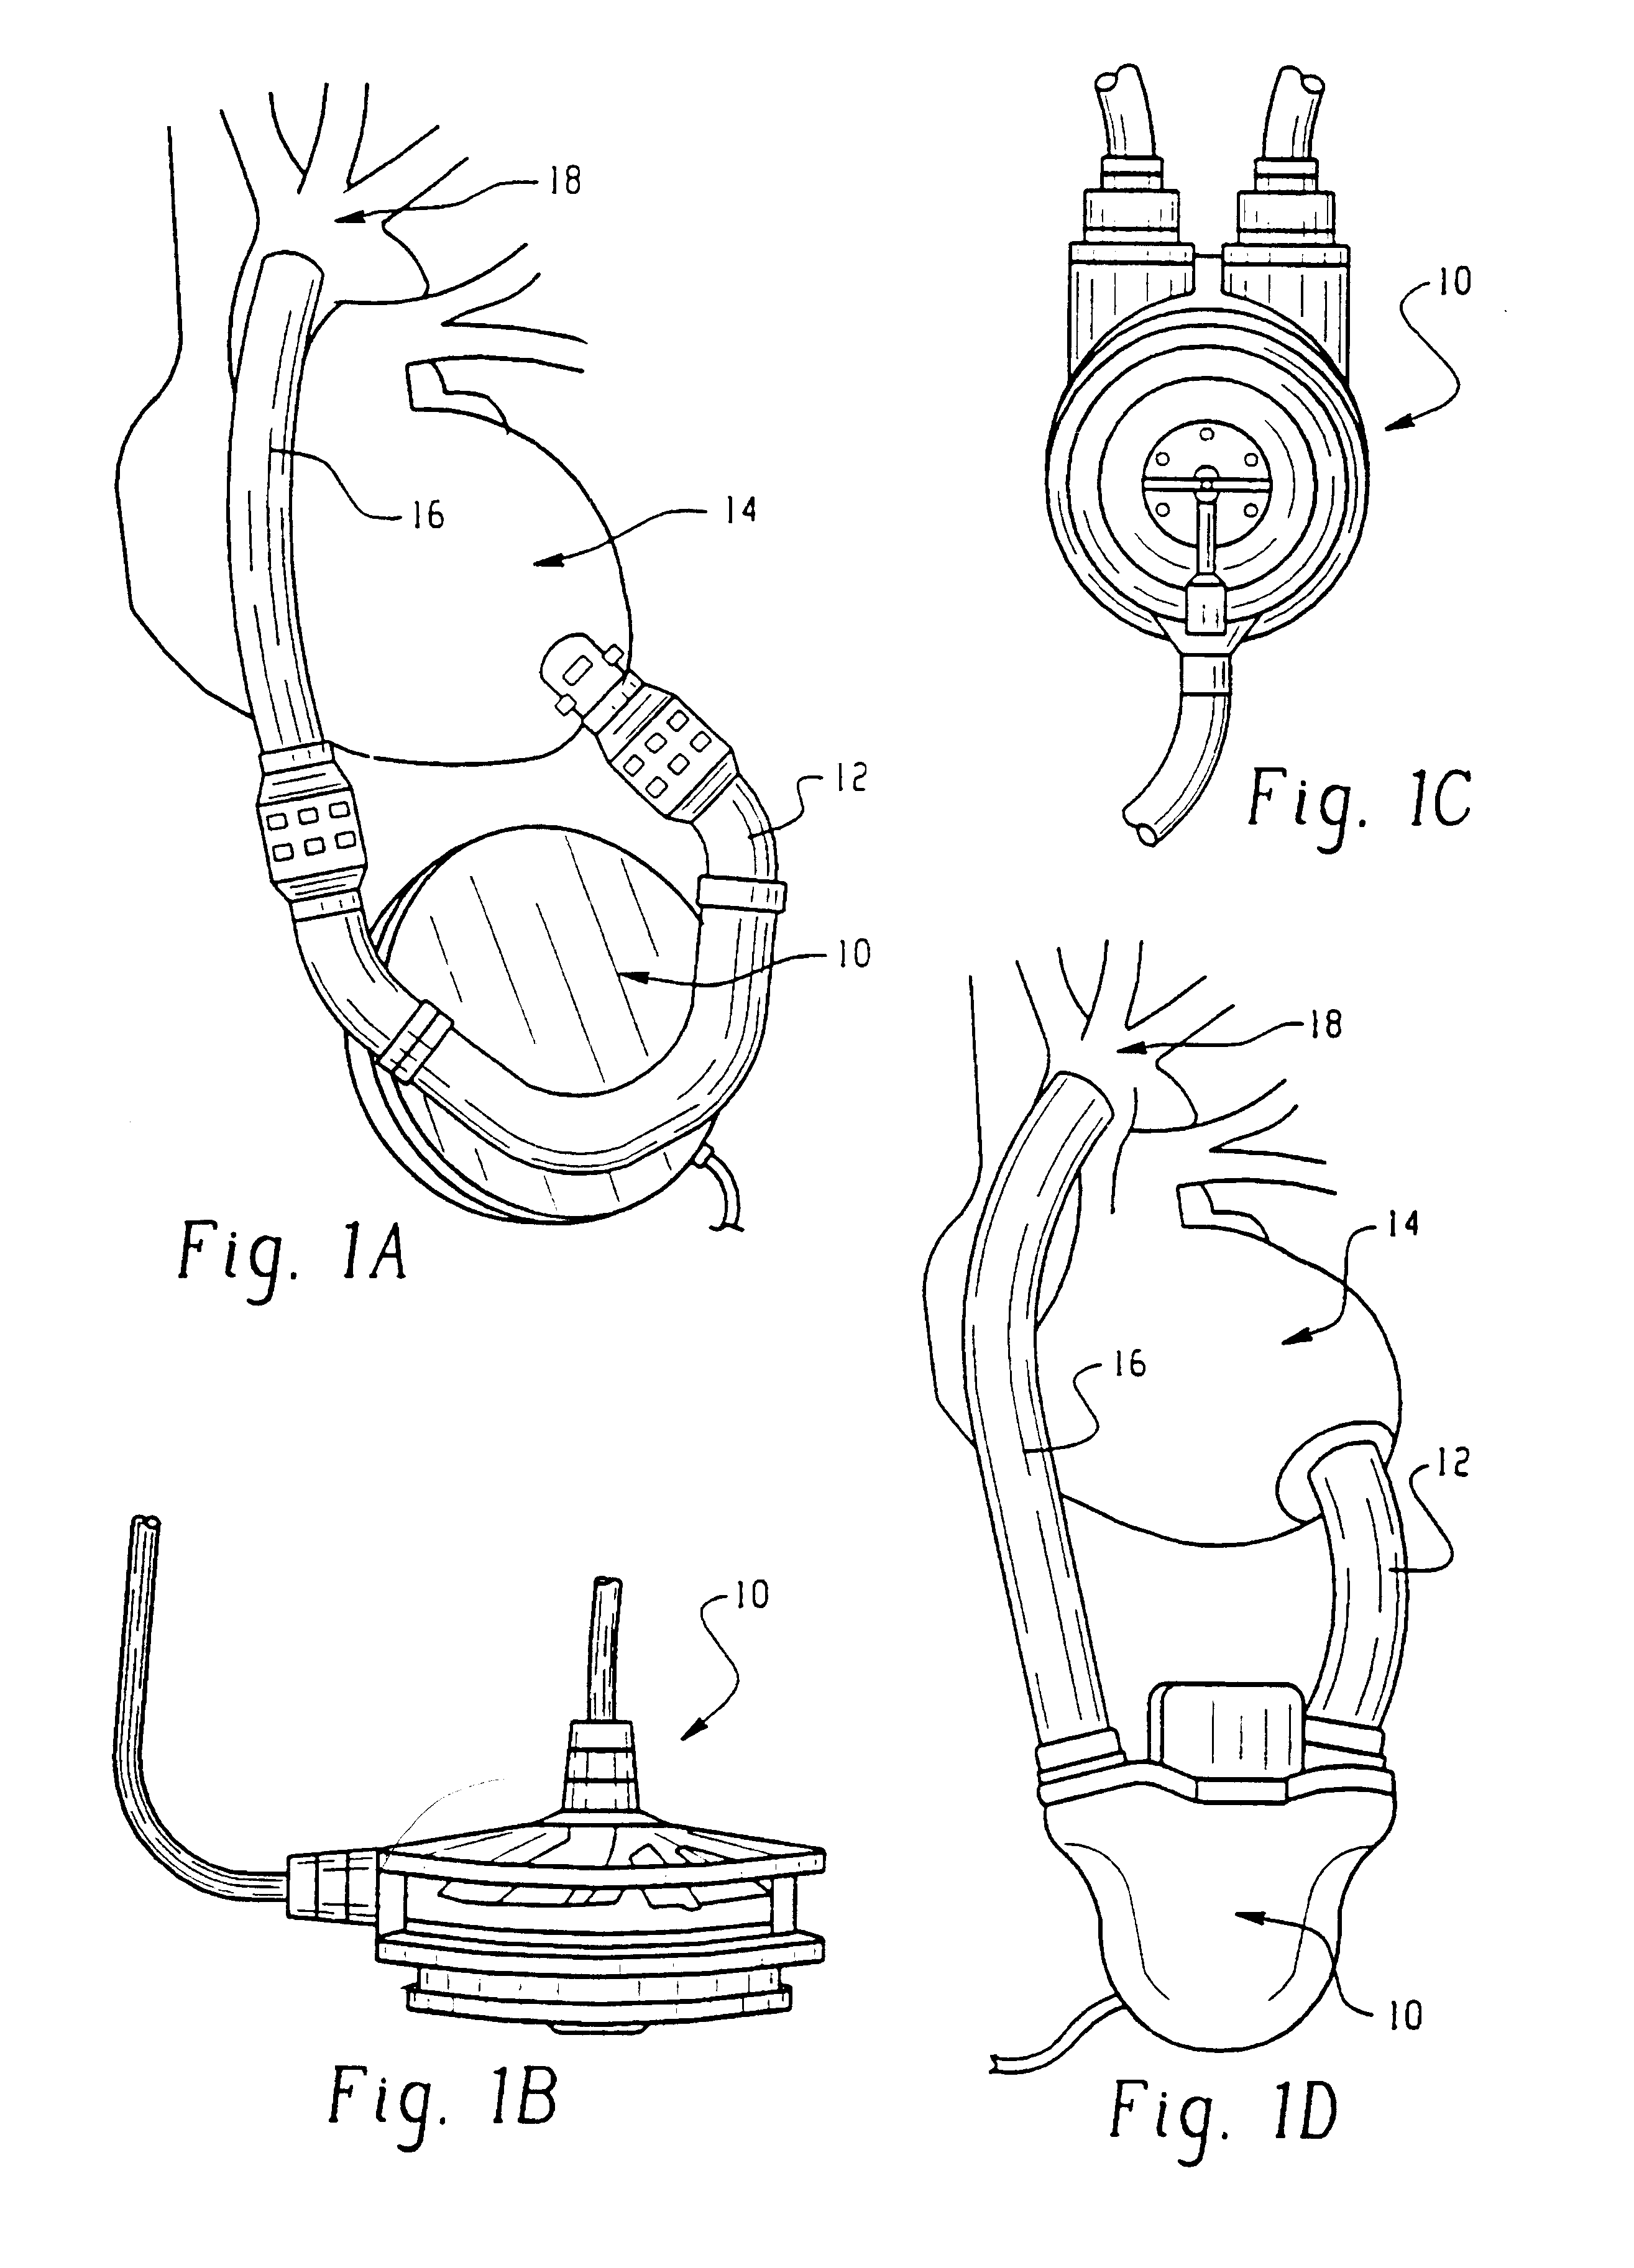 System for incorporating sonomicrometer functions into medical instruments and implantable biomedical devices